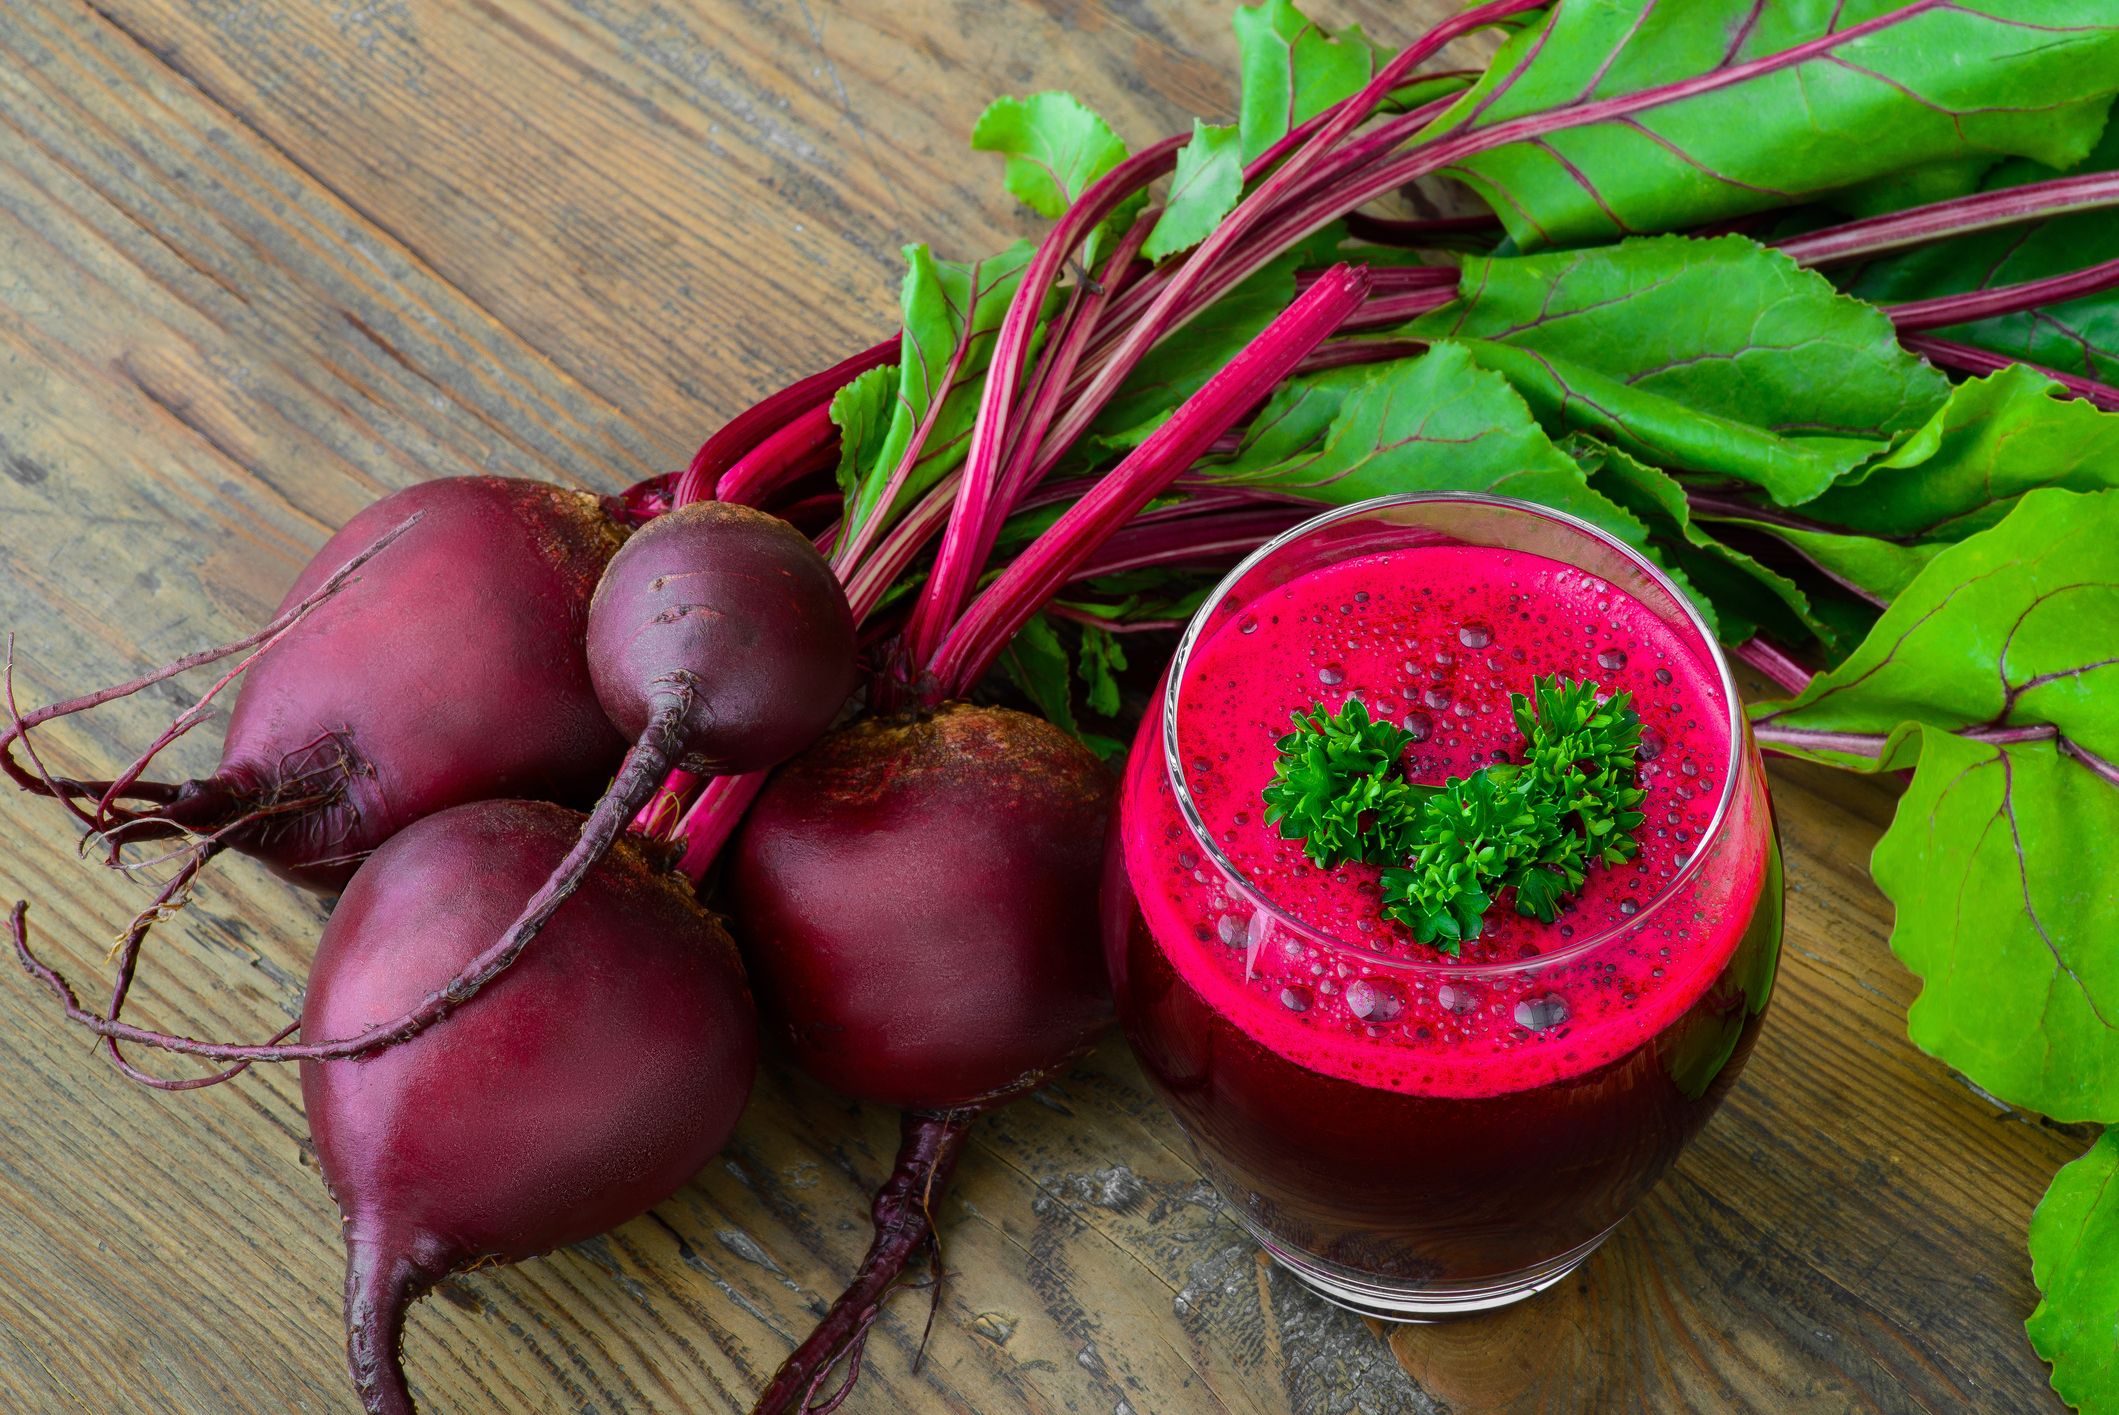 5 Health Benefits of Beets - Beet Health Benefits to Know About